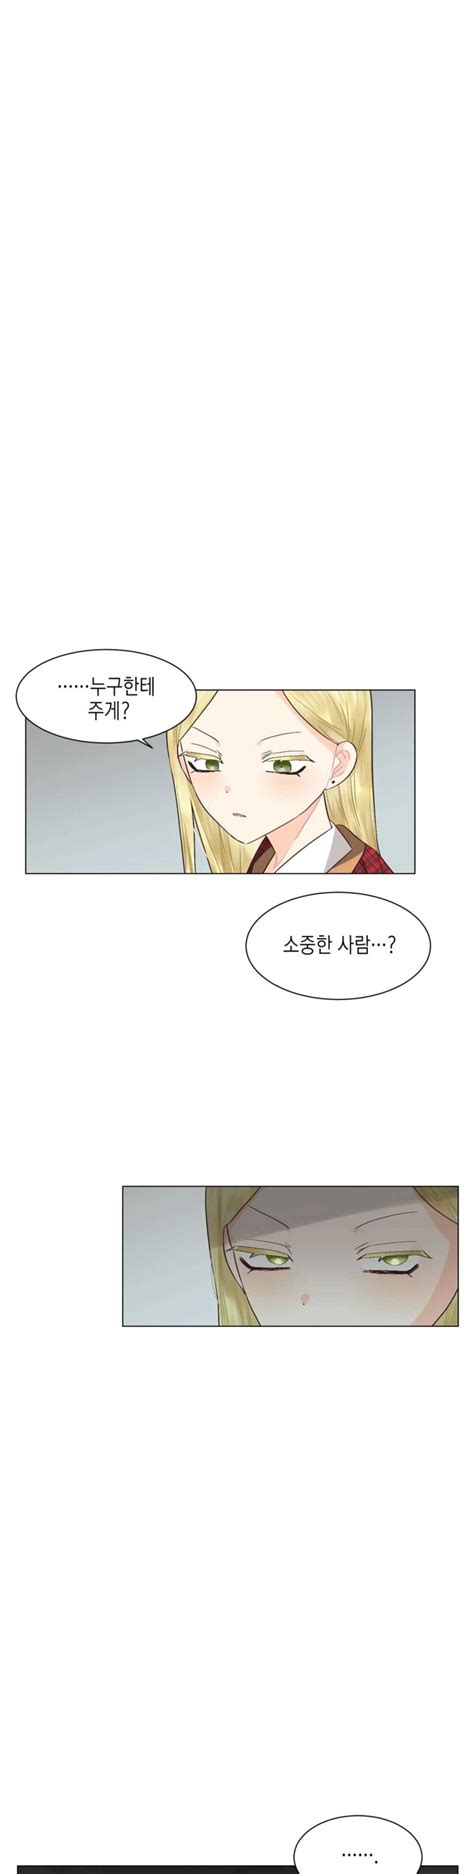 Lesbian Sex Hell Chapter 12 Raw